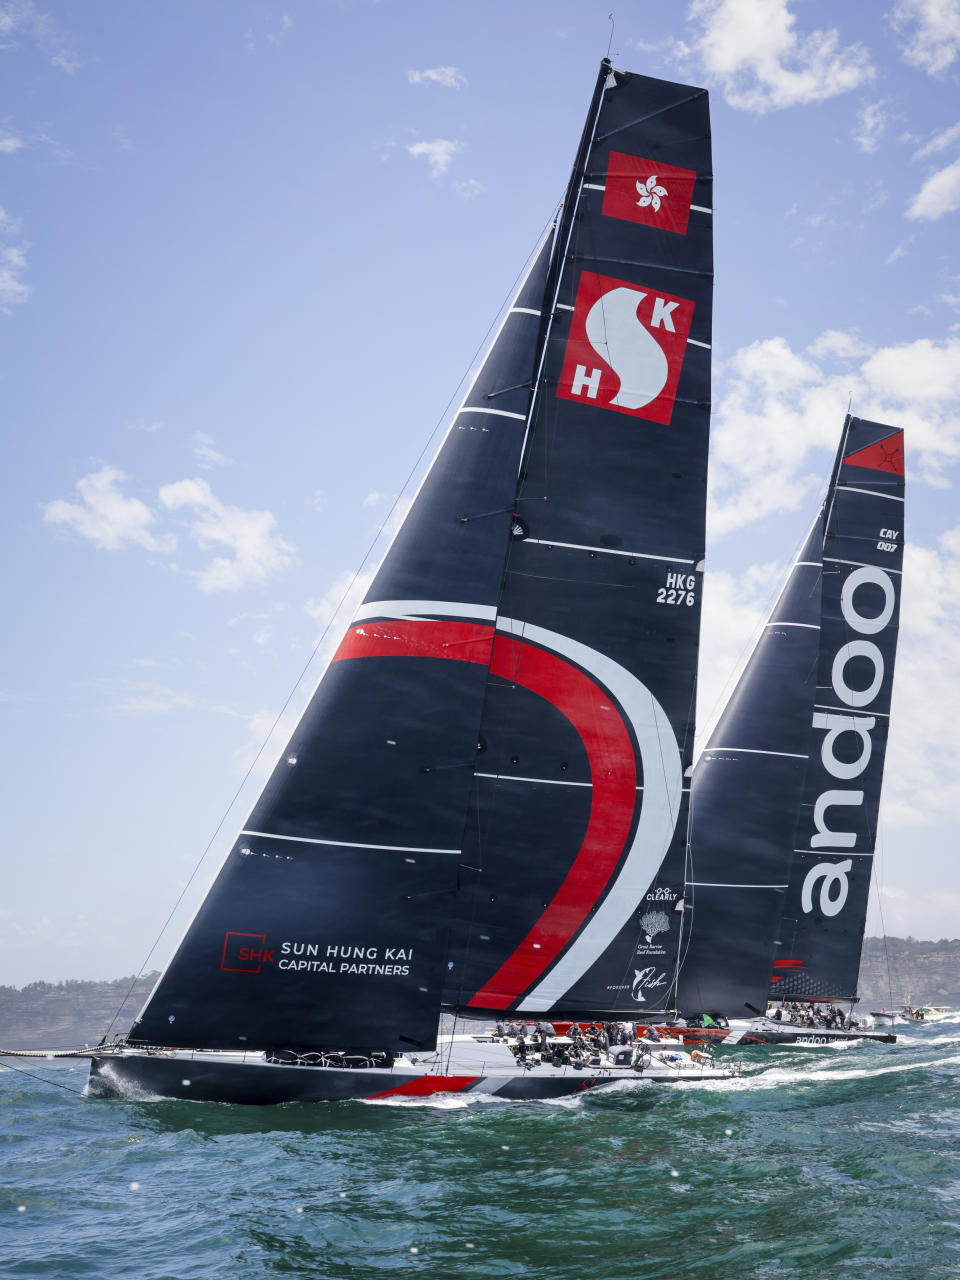 Skallywag, left, and Comanche sail close during the start of the Sydney Hobart yacht race in Sydney, Tuesday, Dec. 26, 2023. The 630-nautical mile race has more than 100 yachts starting in the race to the island state of Tasmania. (Salty Dog/CYCA via AP)